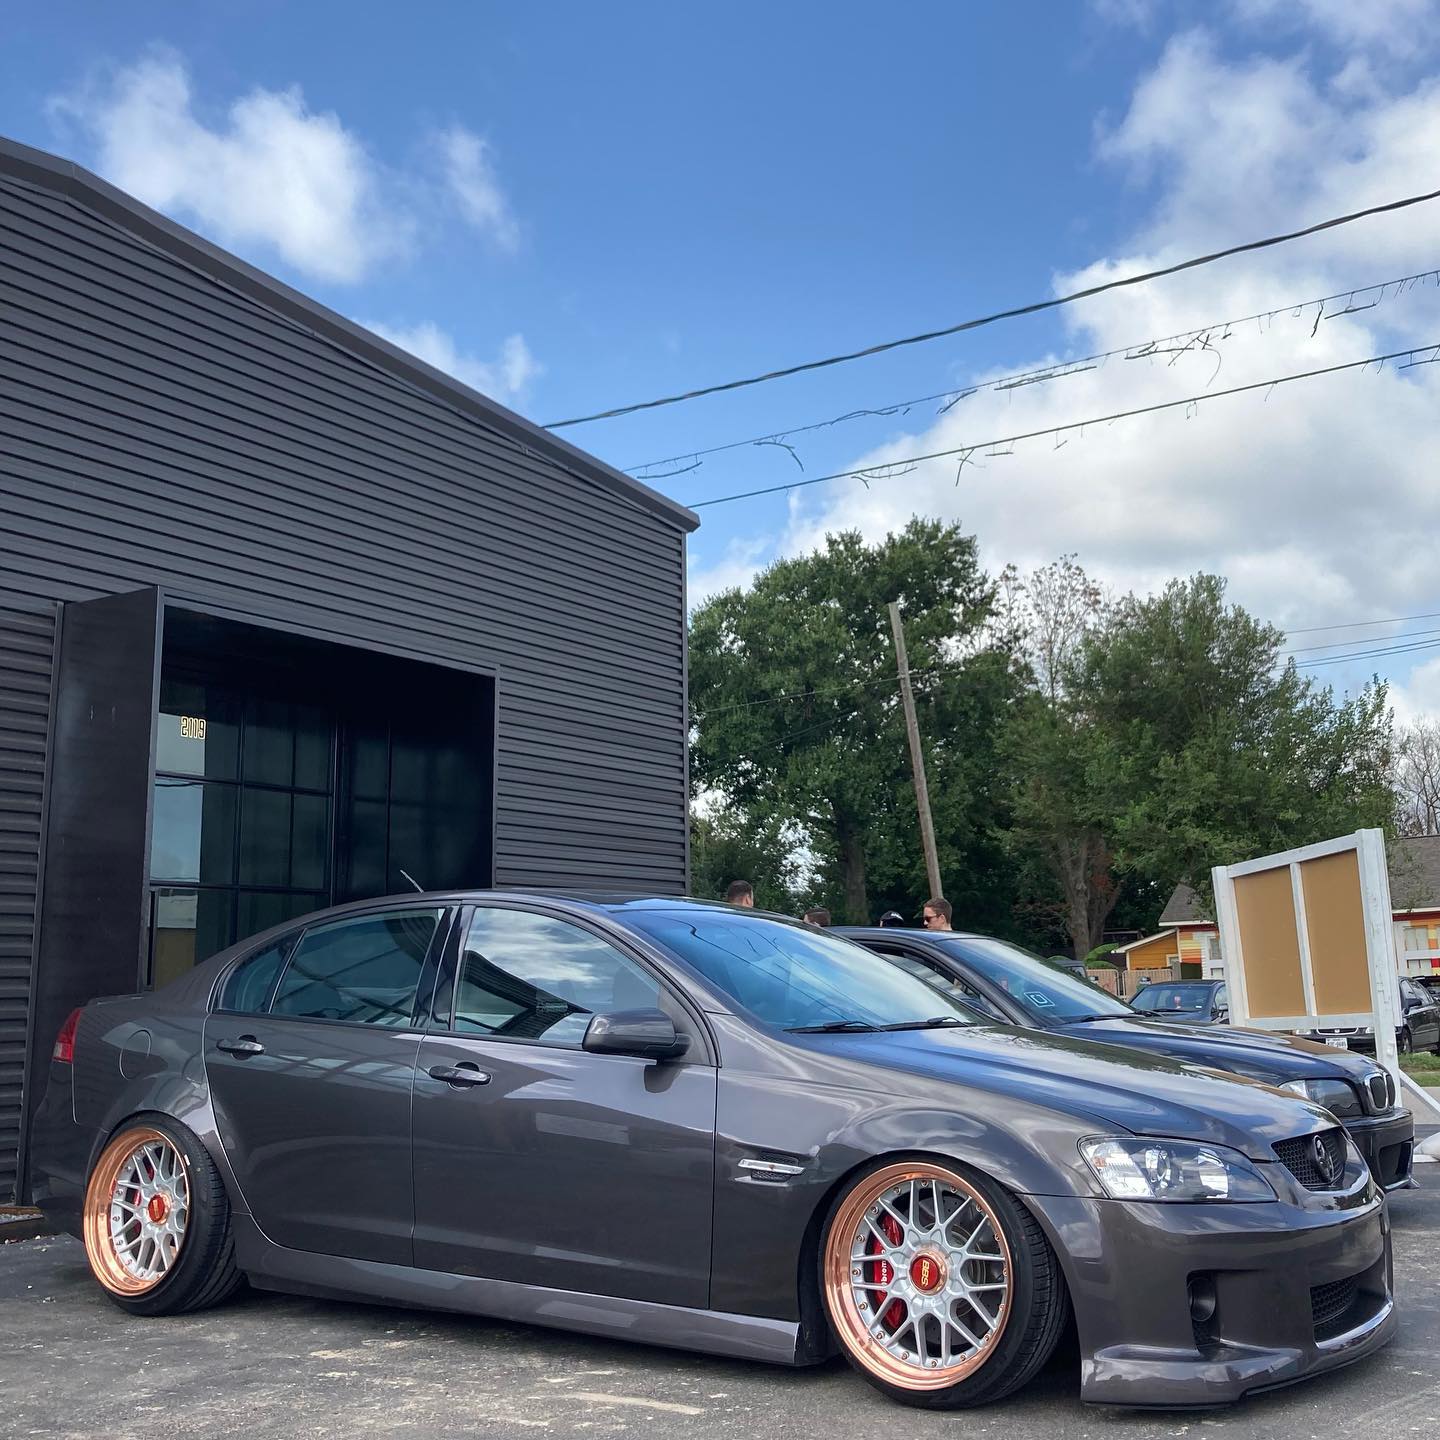 Slammed Pontiac G8 / Holden Commodore with a wide body and BBS custom wheels